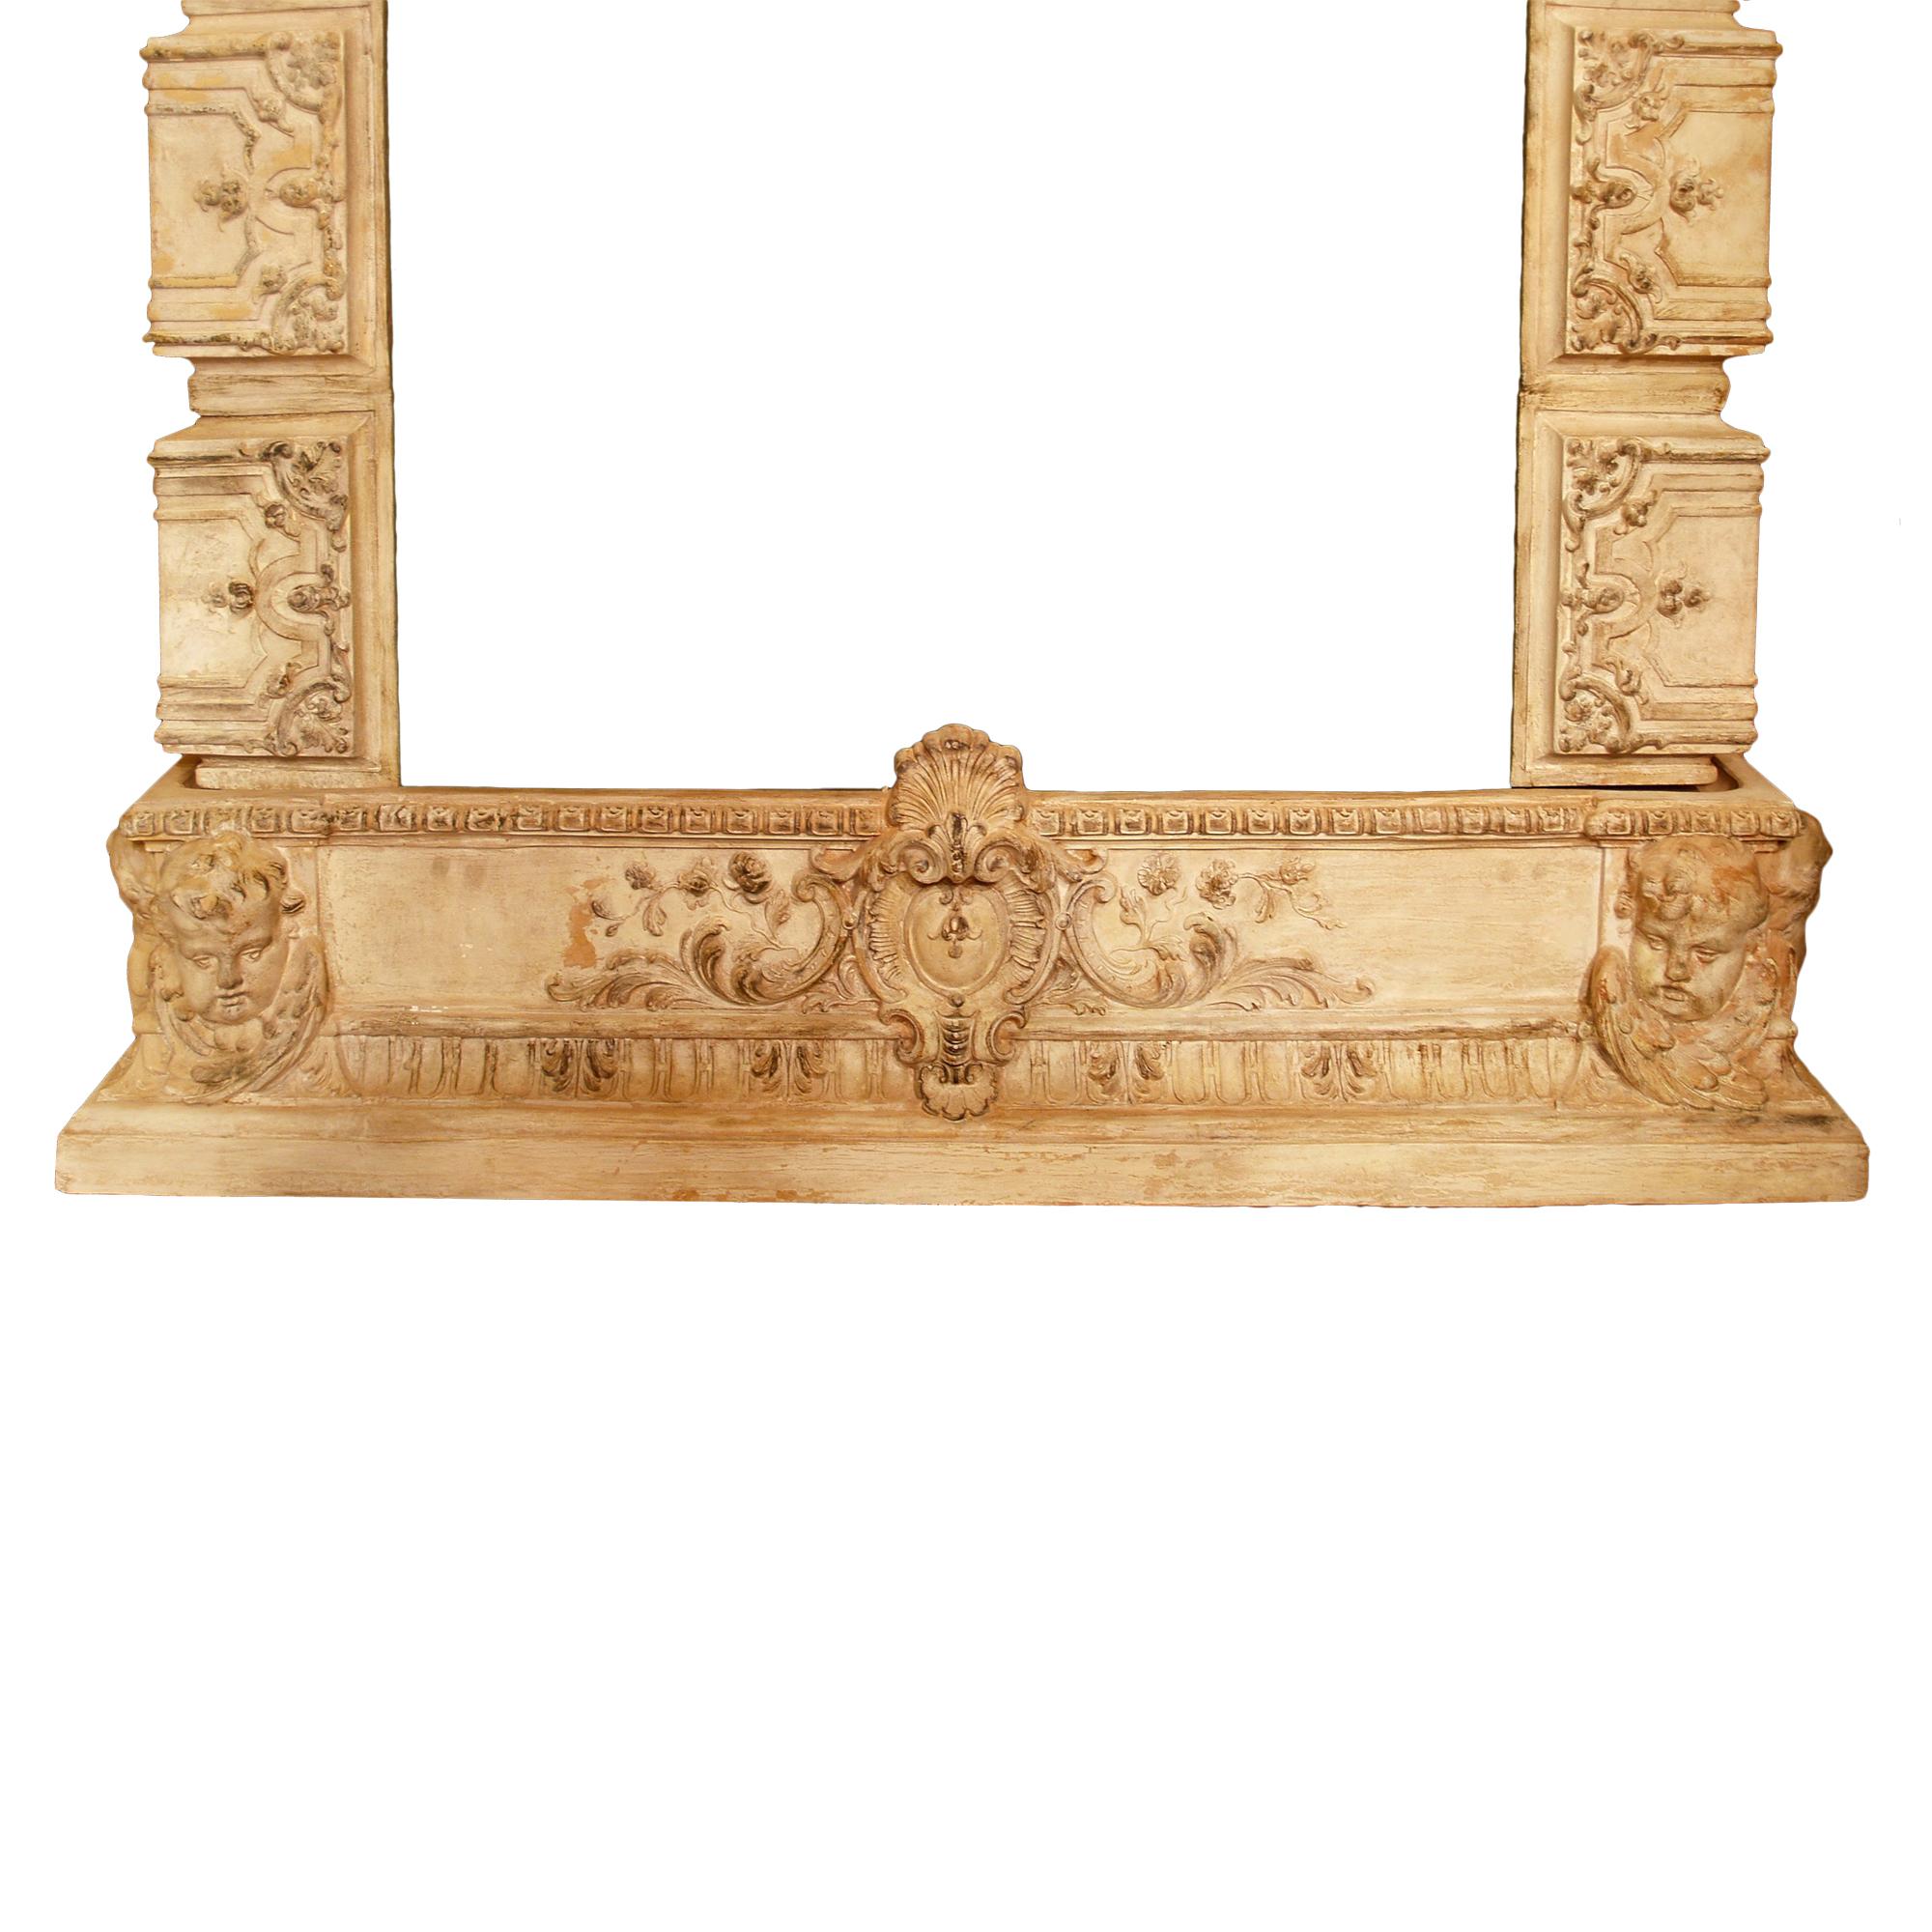 Italian 19th Century Terra Cotta Fireplace Mantel In Good Condition For Sale In West Palm Beach, FL